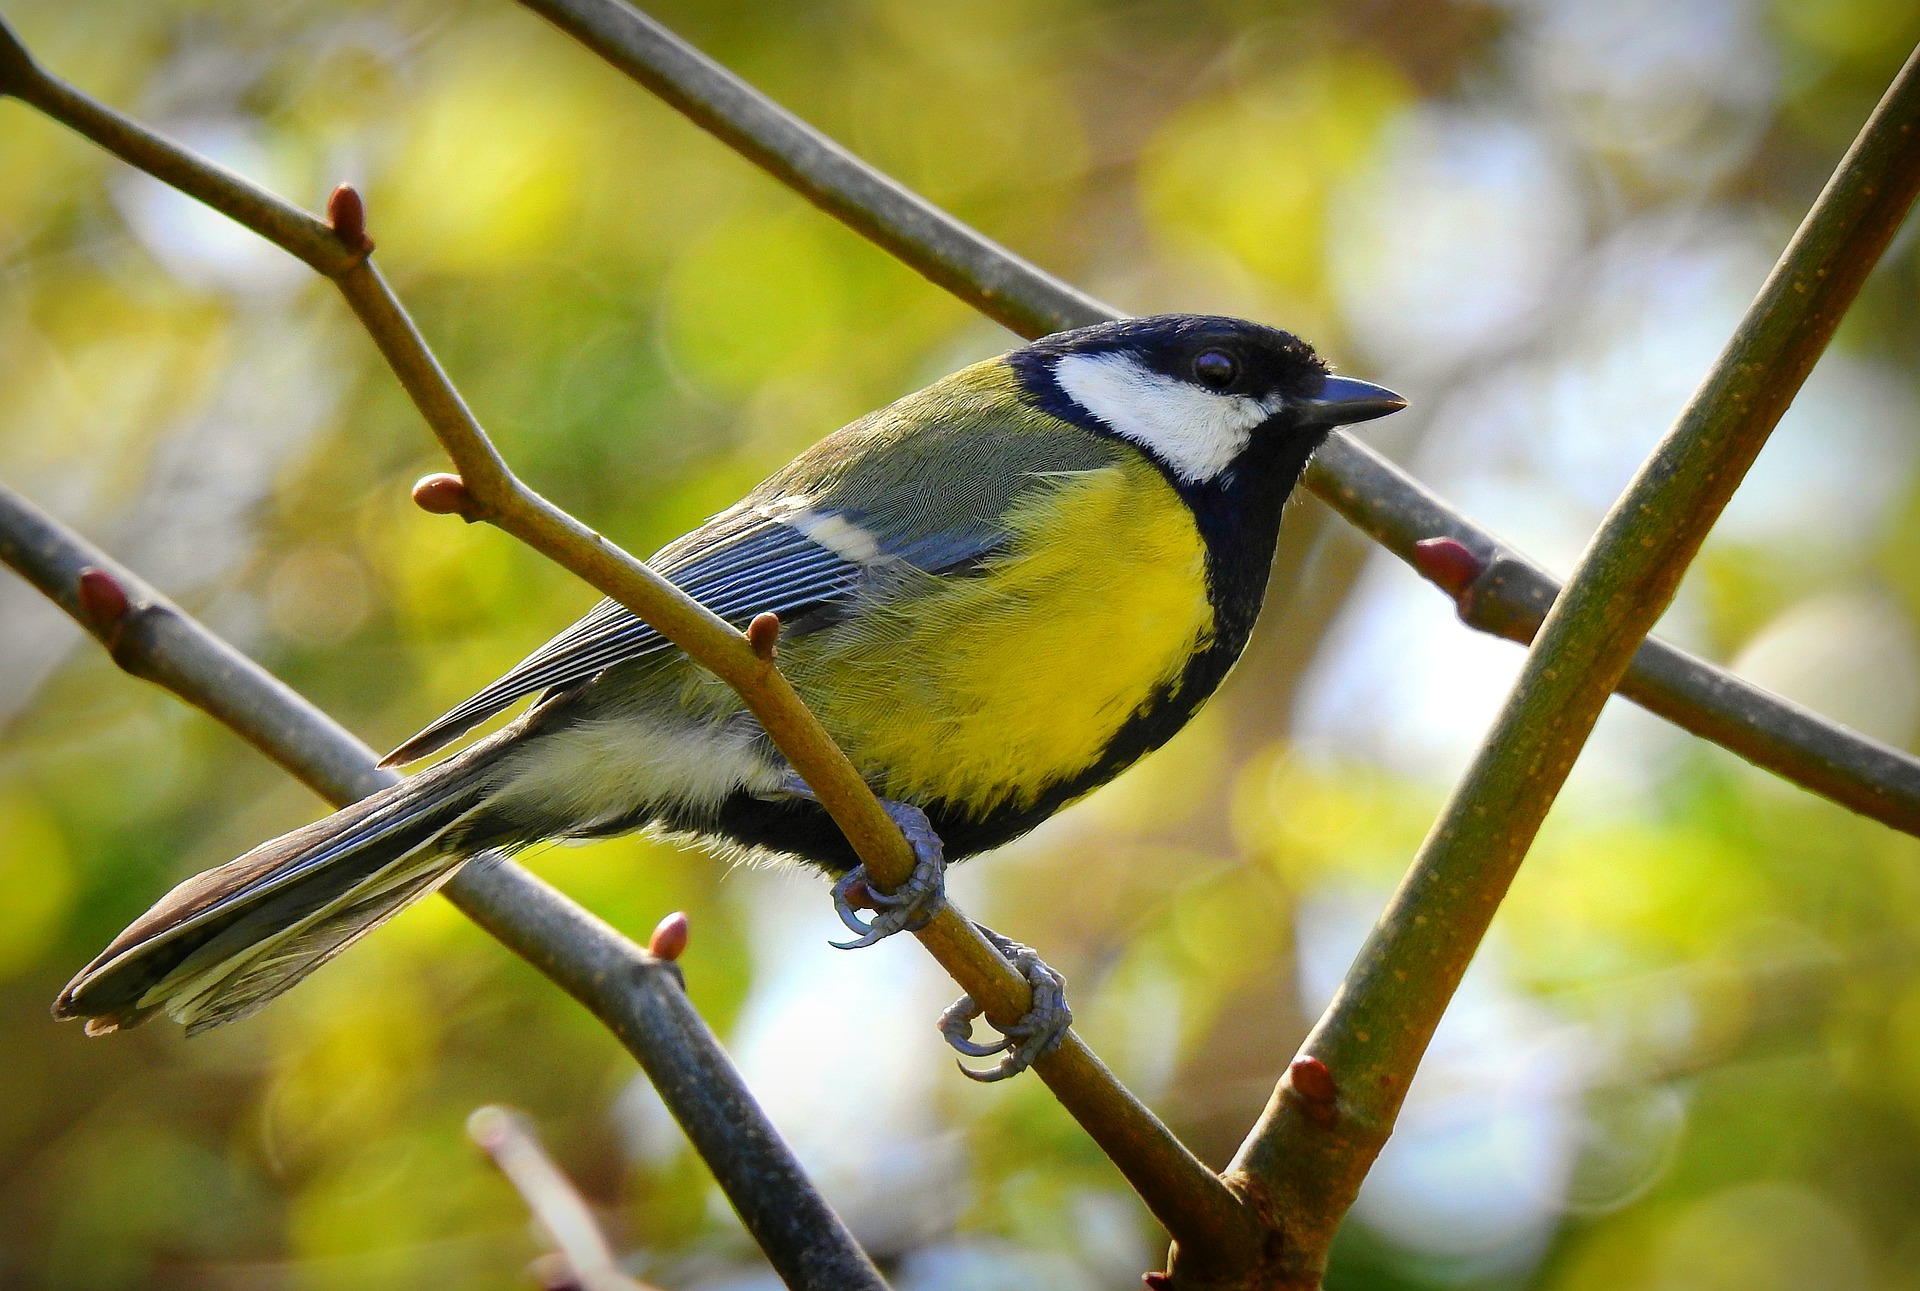 A great tit perched in a tree